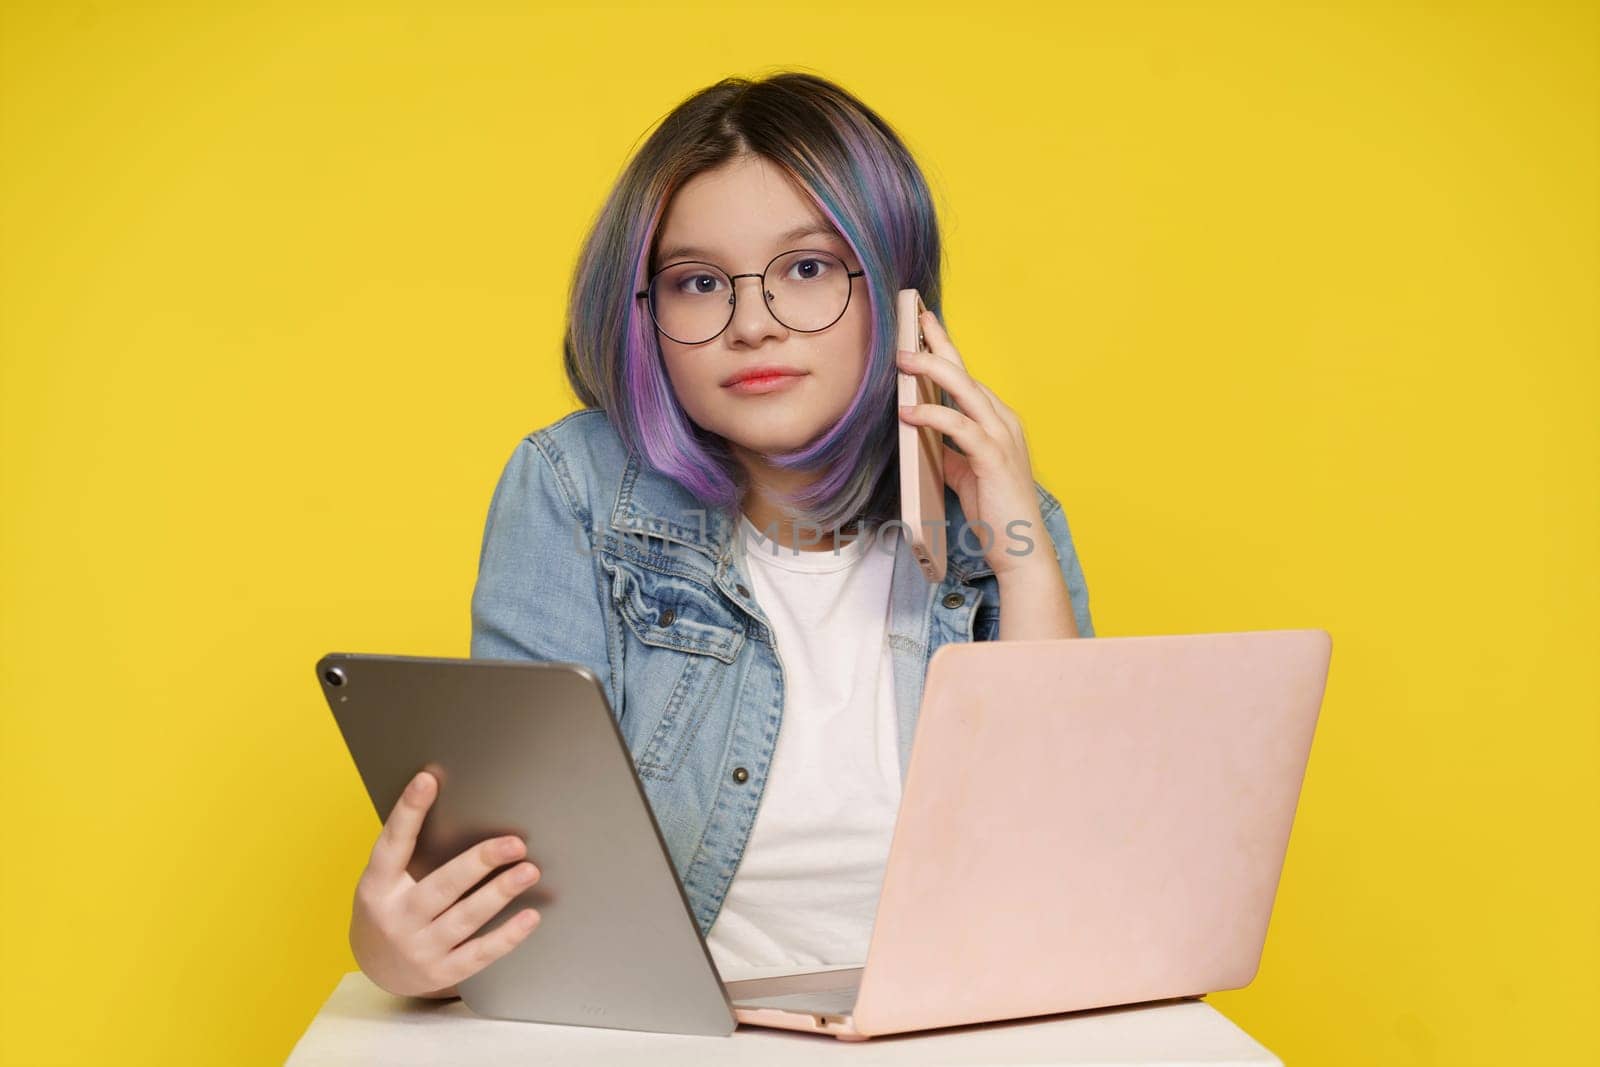 Modern Technology In Daily Life, Teenage Girl Holding Laptop, Tablet Pc, And Mobile Phone. Isolated On Yellow Background, Concept Of Tech-Savvy Lifestyle, Devices Seamlessly Integrate Into Daily Activities. by LipikStockMedia